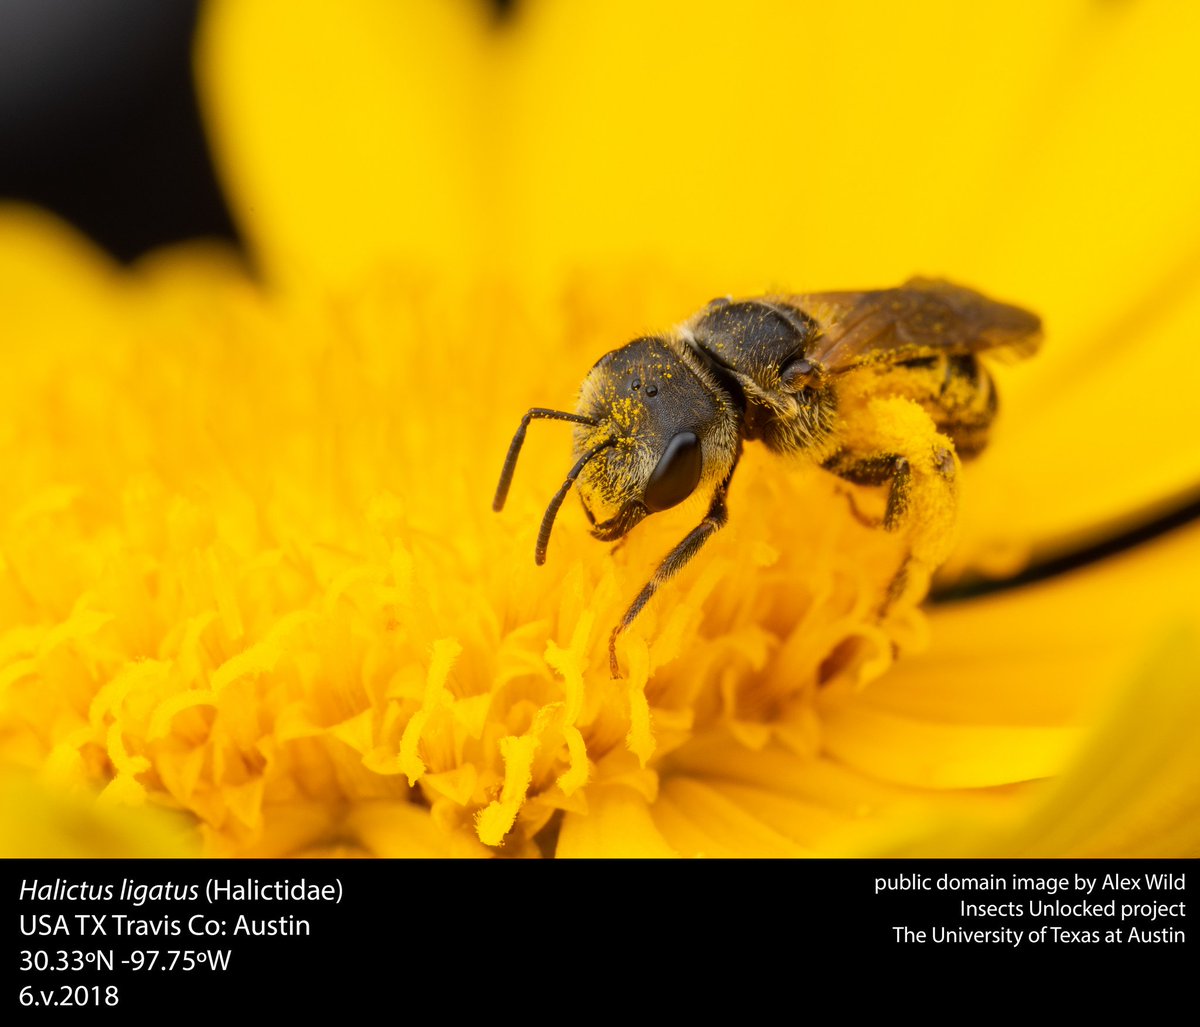 A native bee gathers pollen from a Coreopsis flower. New public domain image by @Myrmecos!